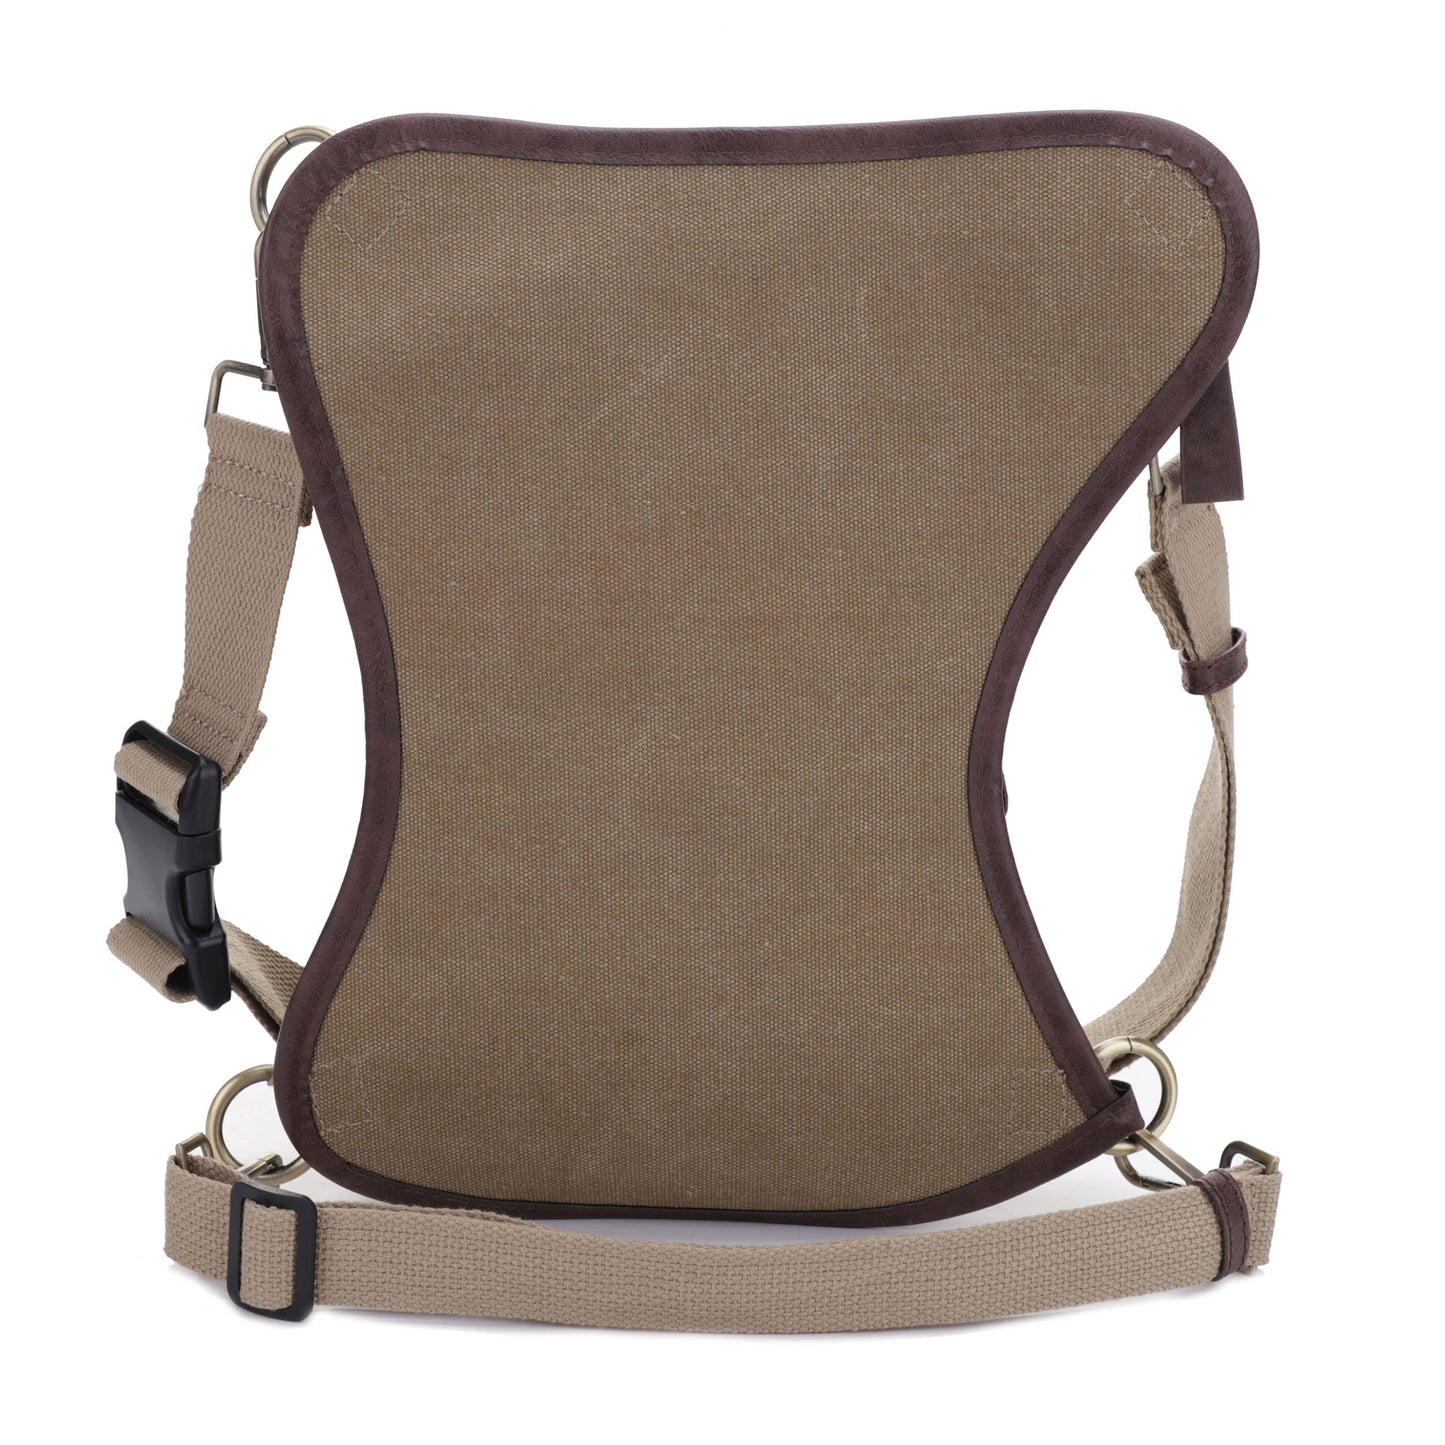 Cougar Canvas Concealed Carry Waist and Leg Bag